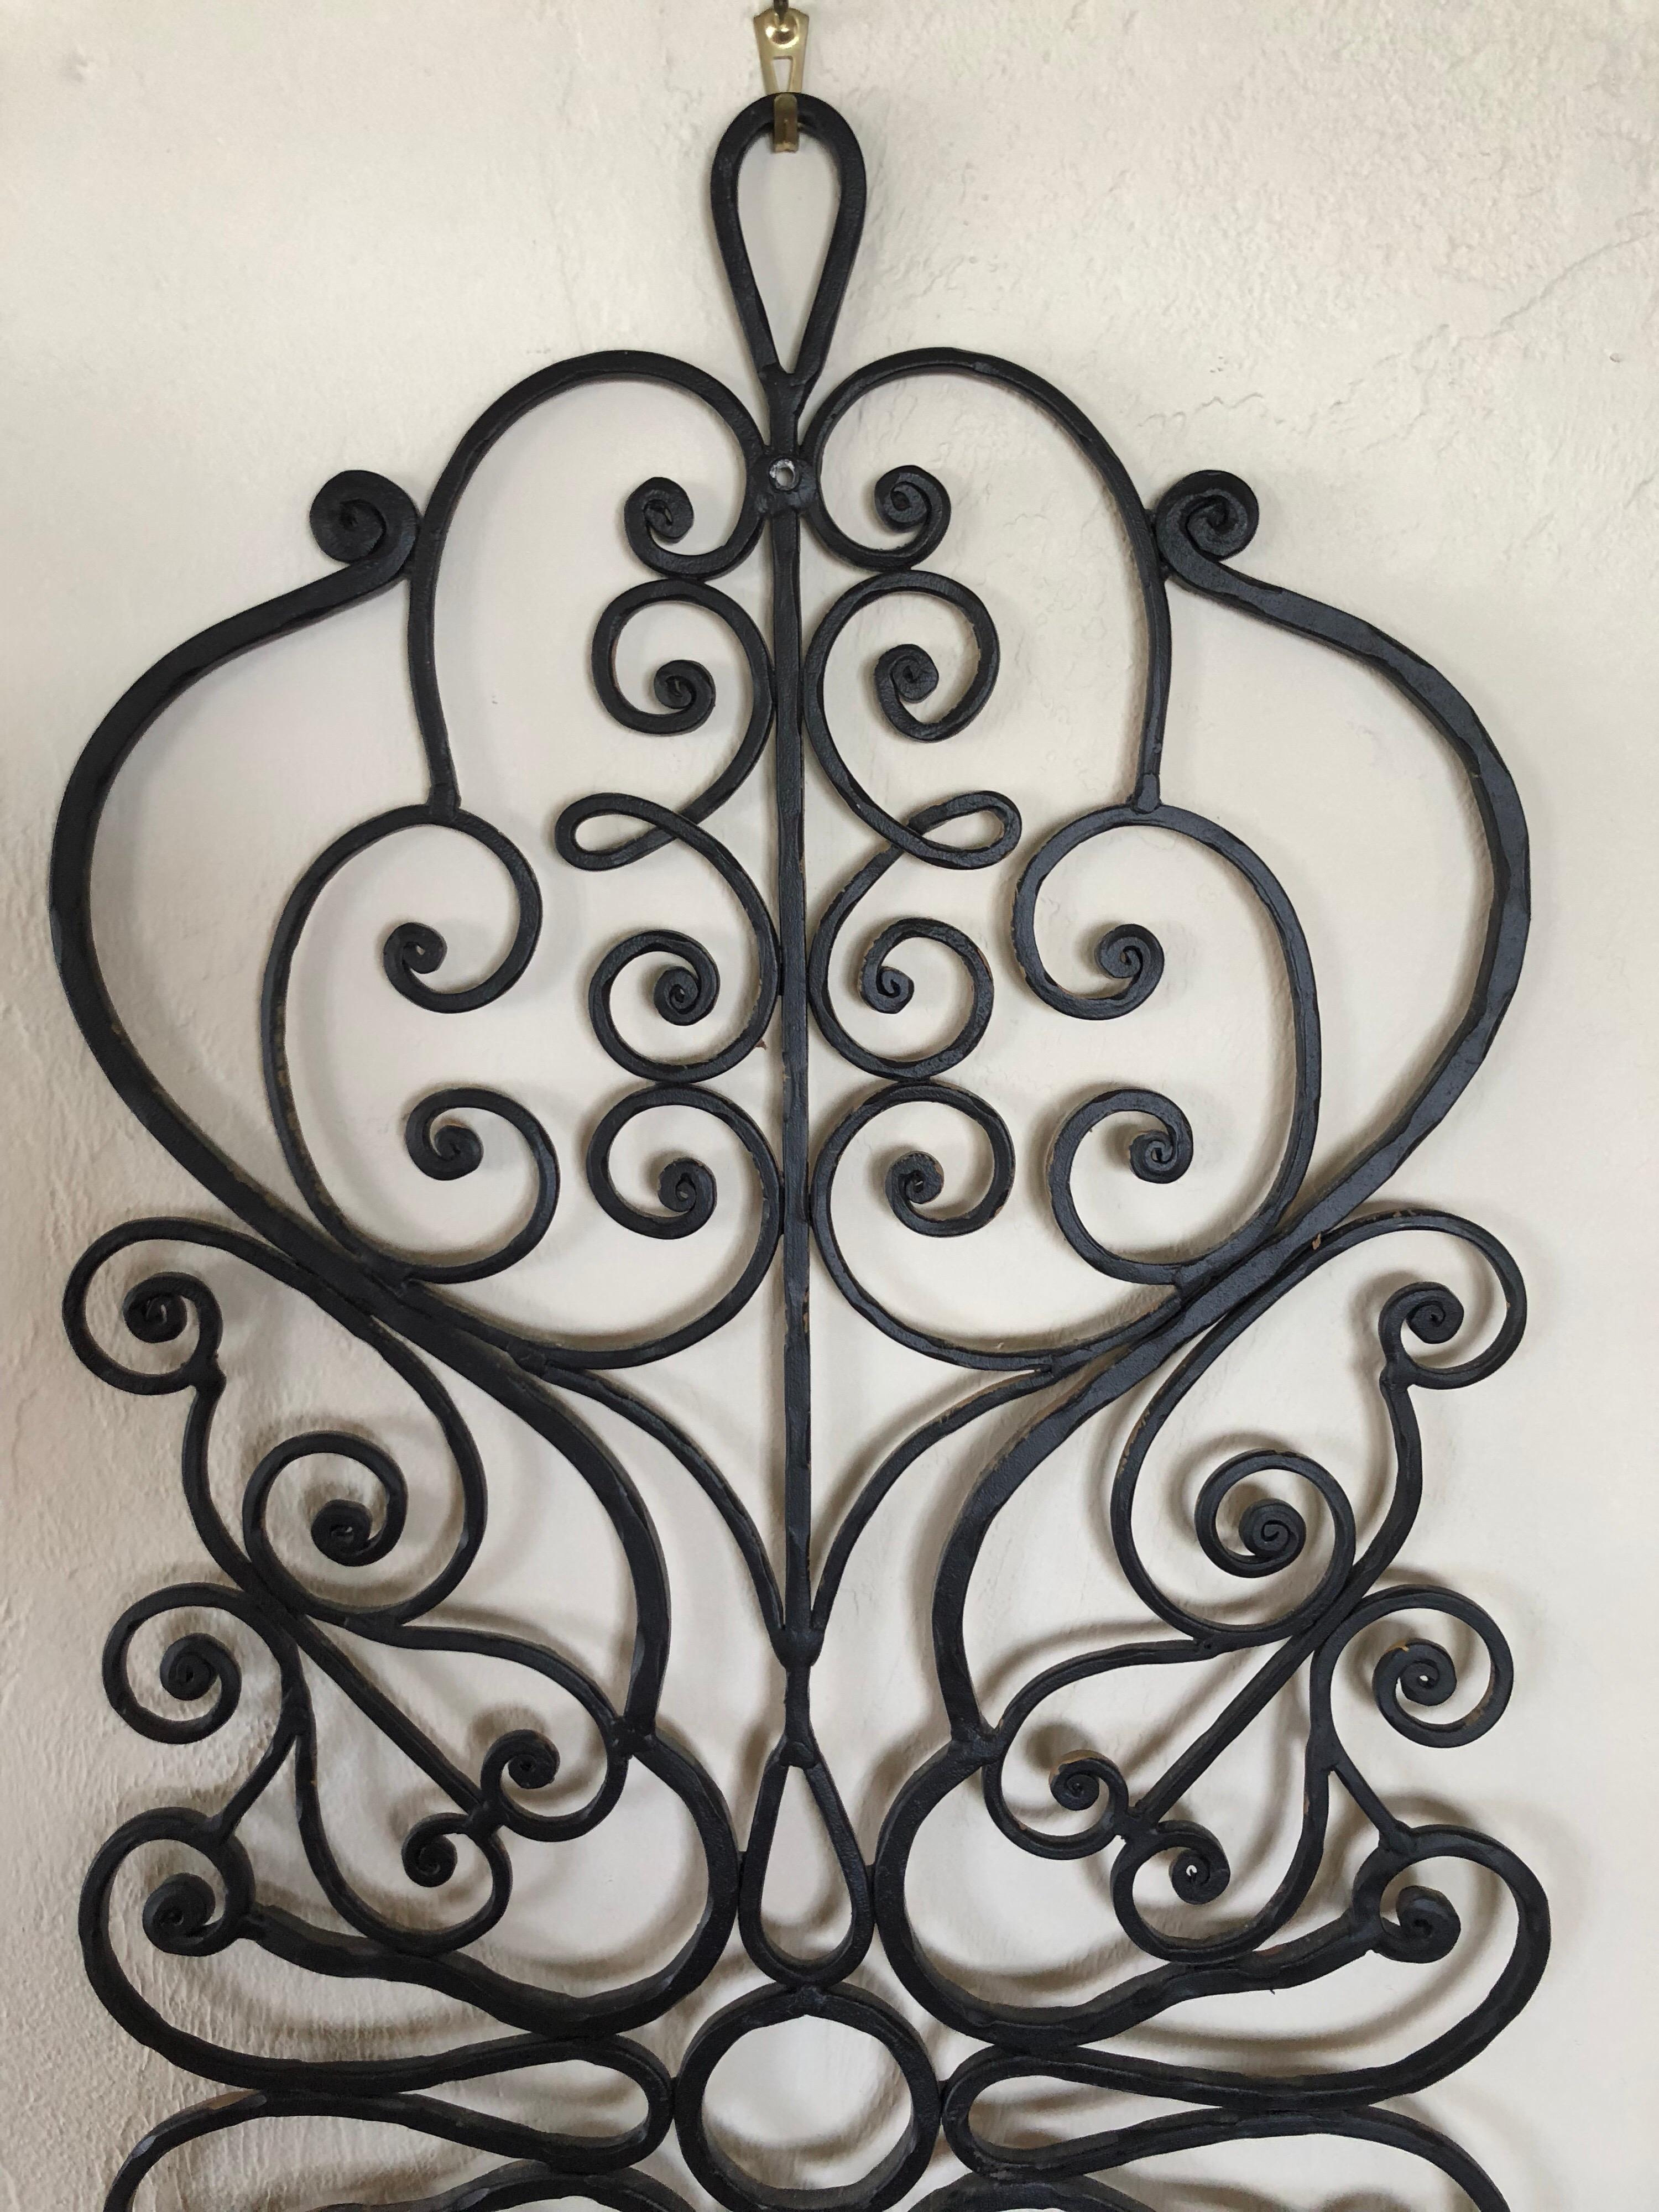 Mid-20th Century Large Hand-Wrought Iron Wall Sculpture